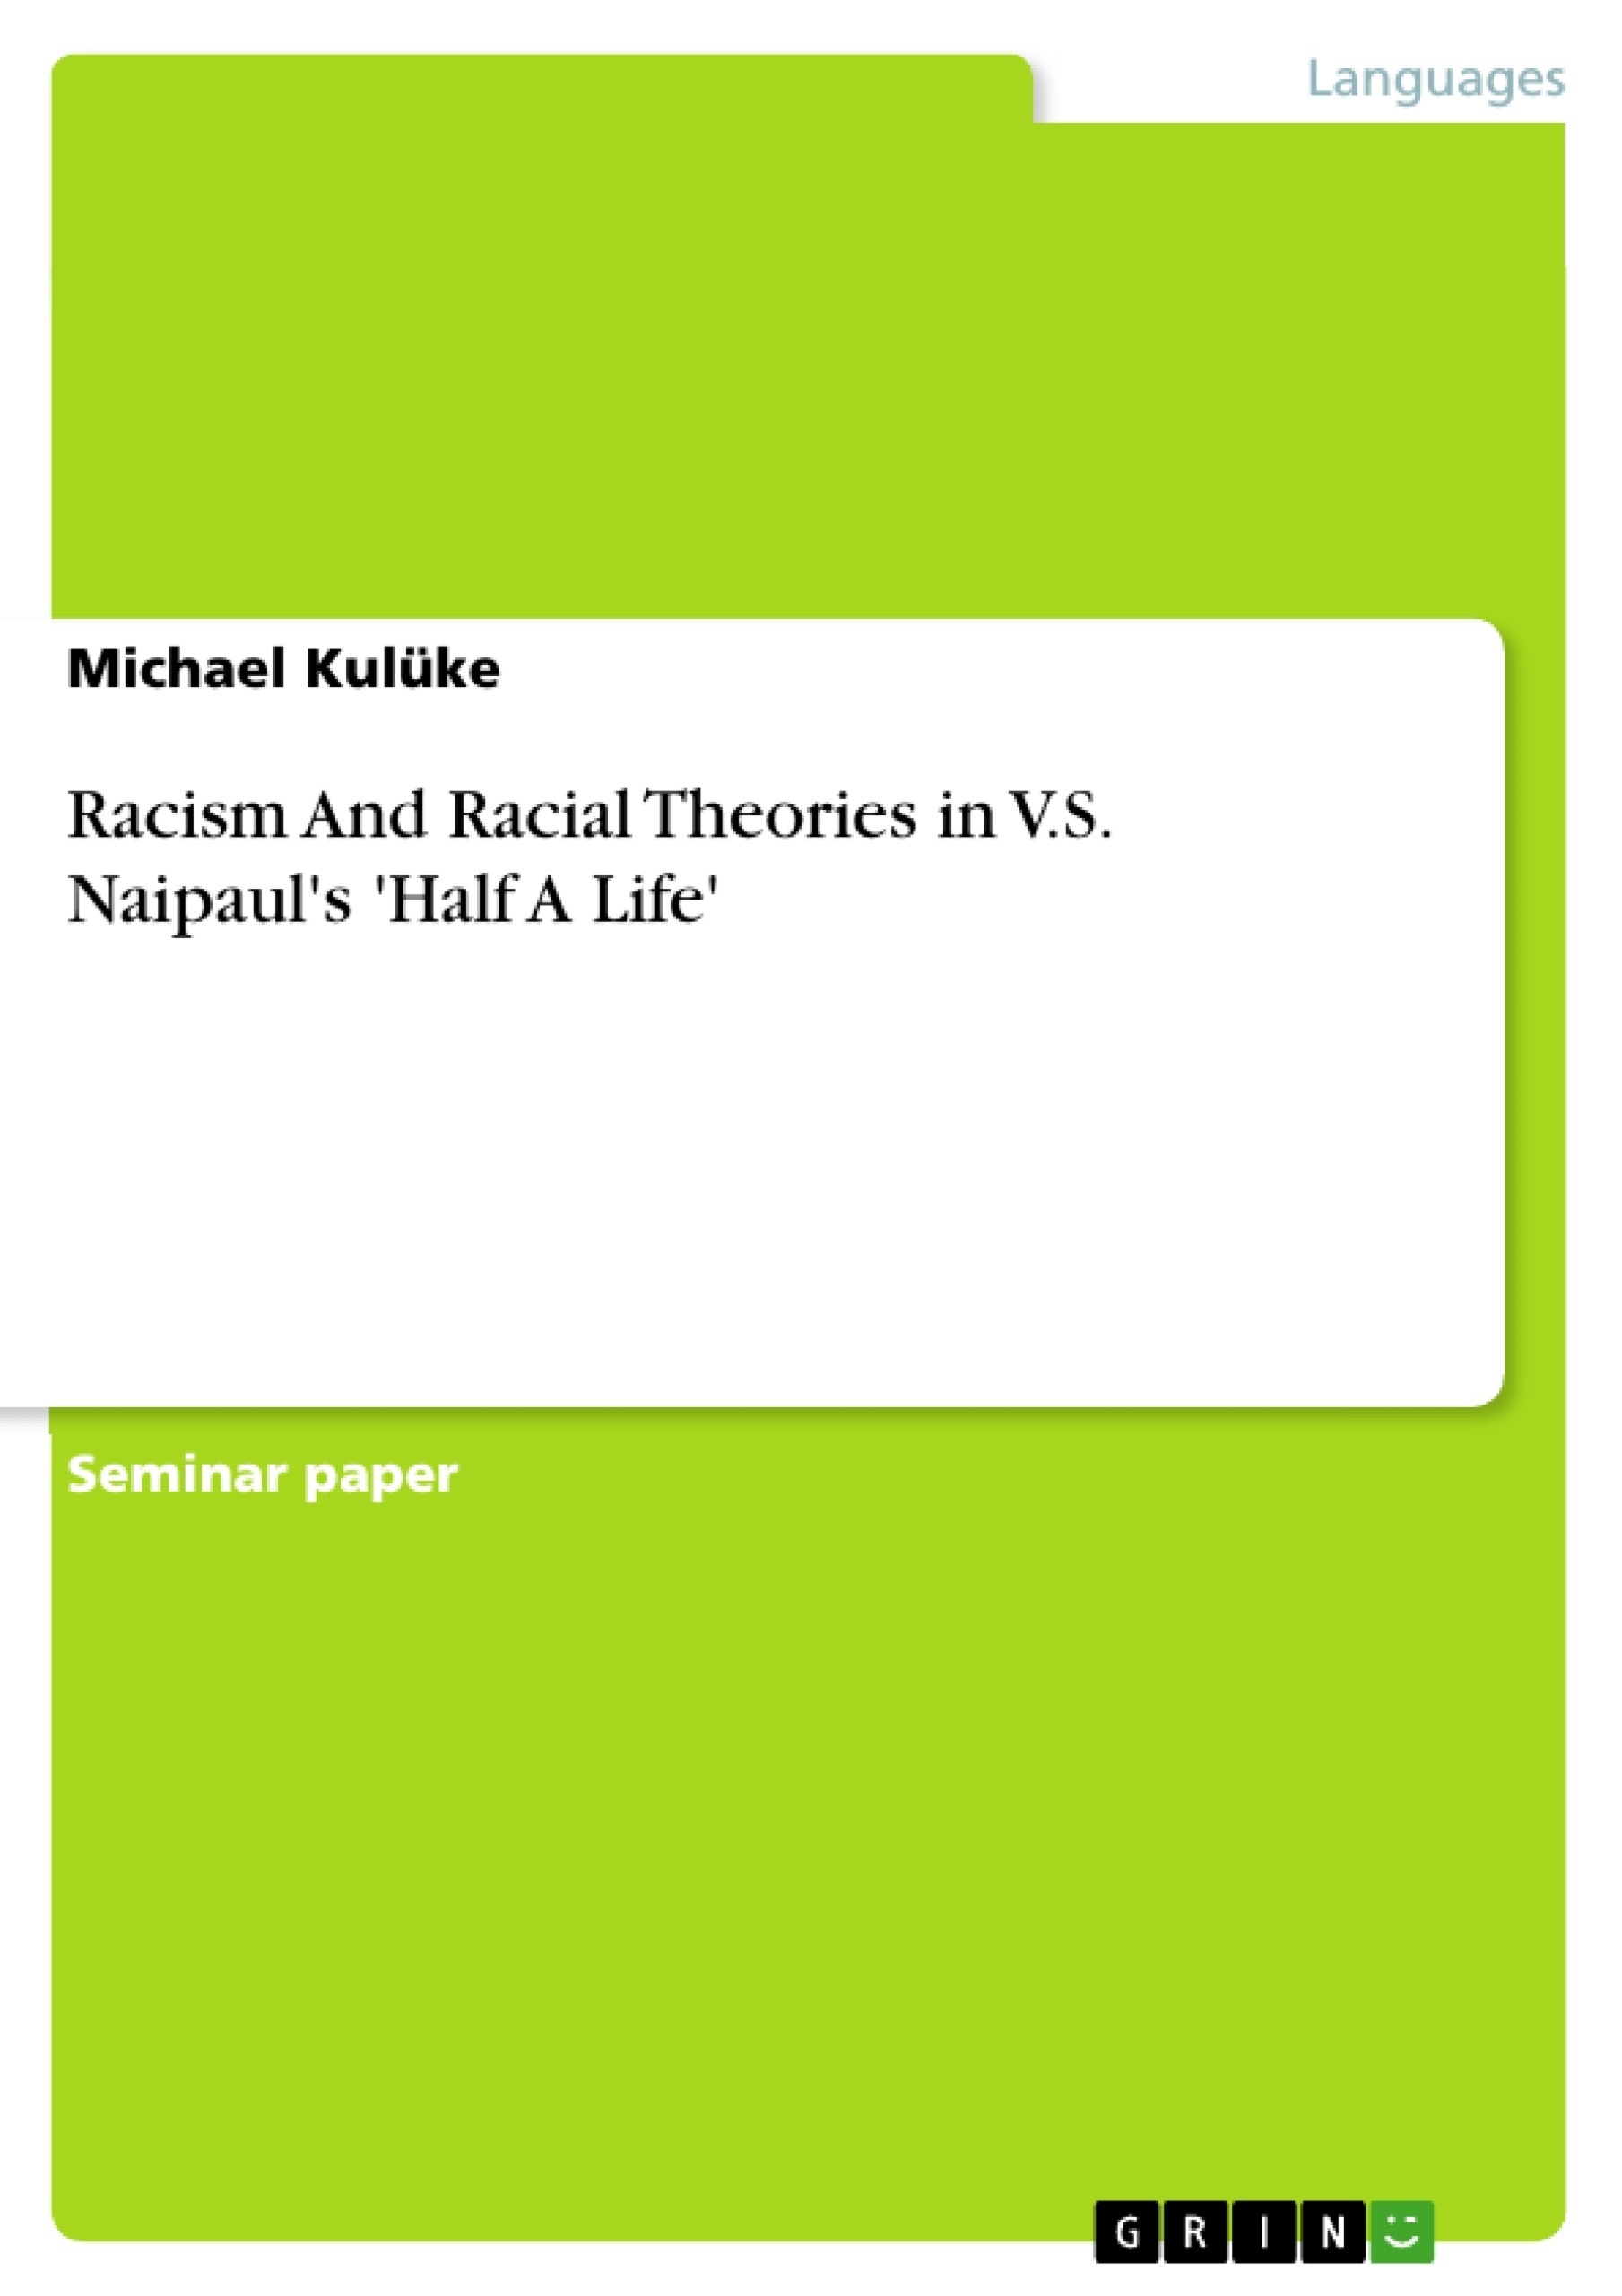 Titre: Racism And Racial Theories in V.S. Naipaul's 'Half A Life'